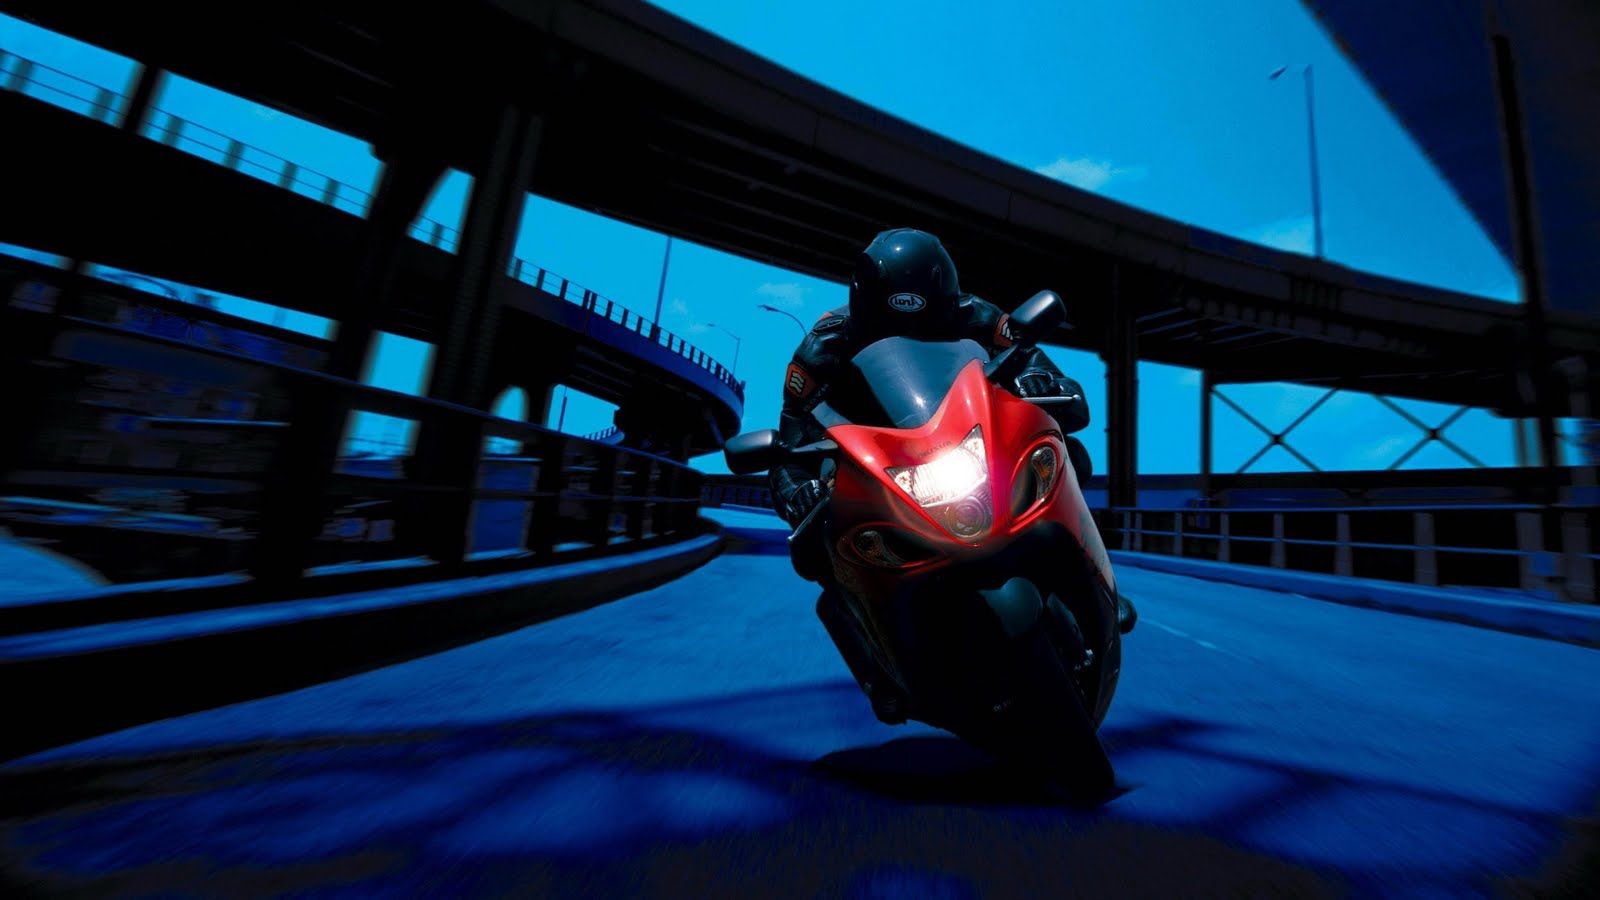 Nice desktop hd wallpaper Blue with a red motorcycle - Wallpapers ...